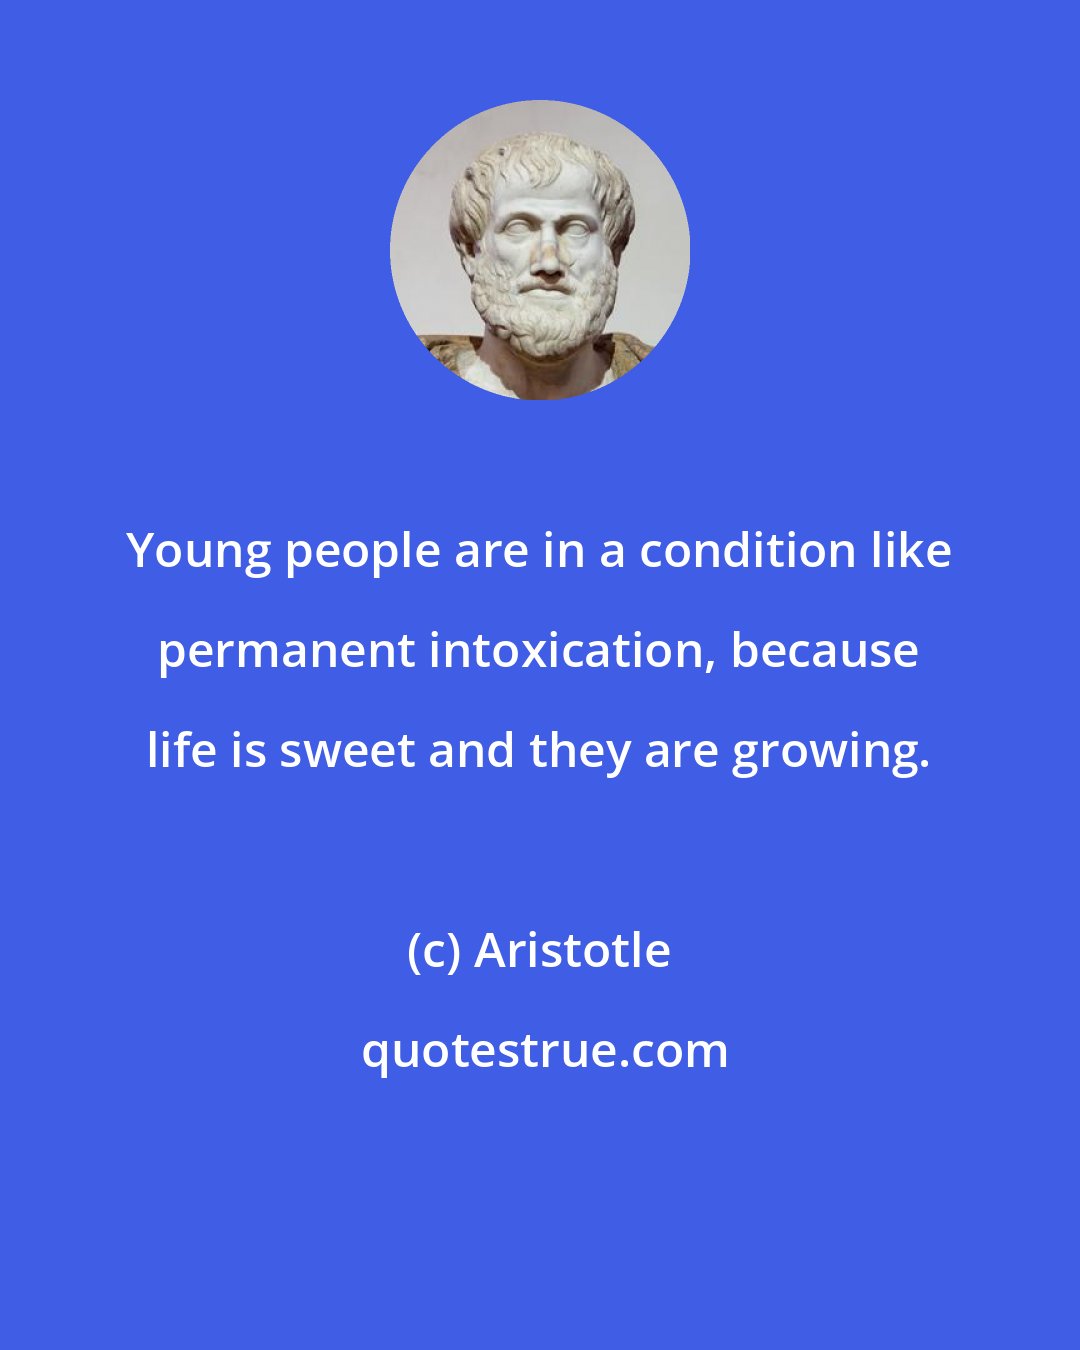 Aristotle: Young people are in a condition like permanent intoxication, because life is sweet and they are growing.